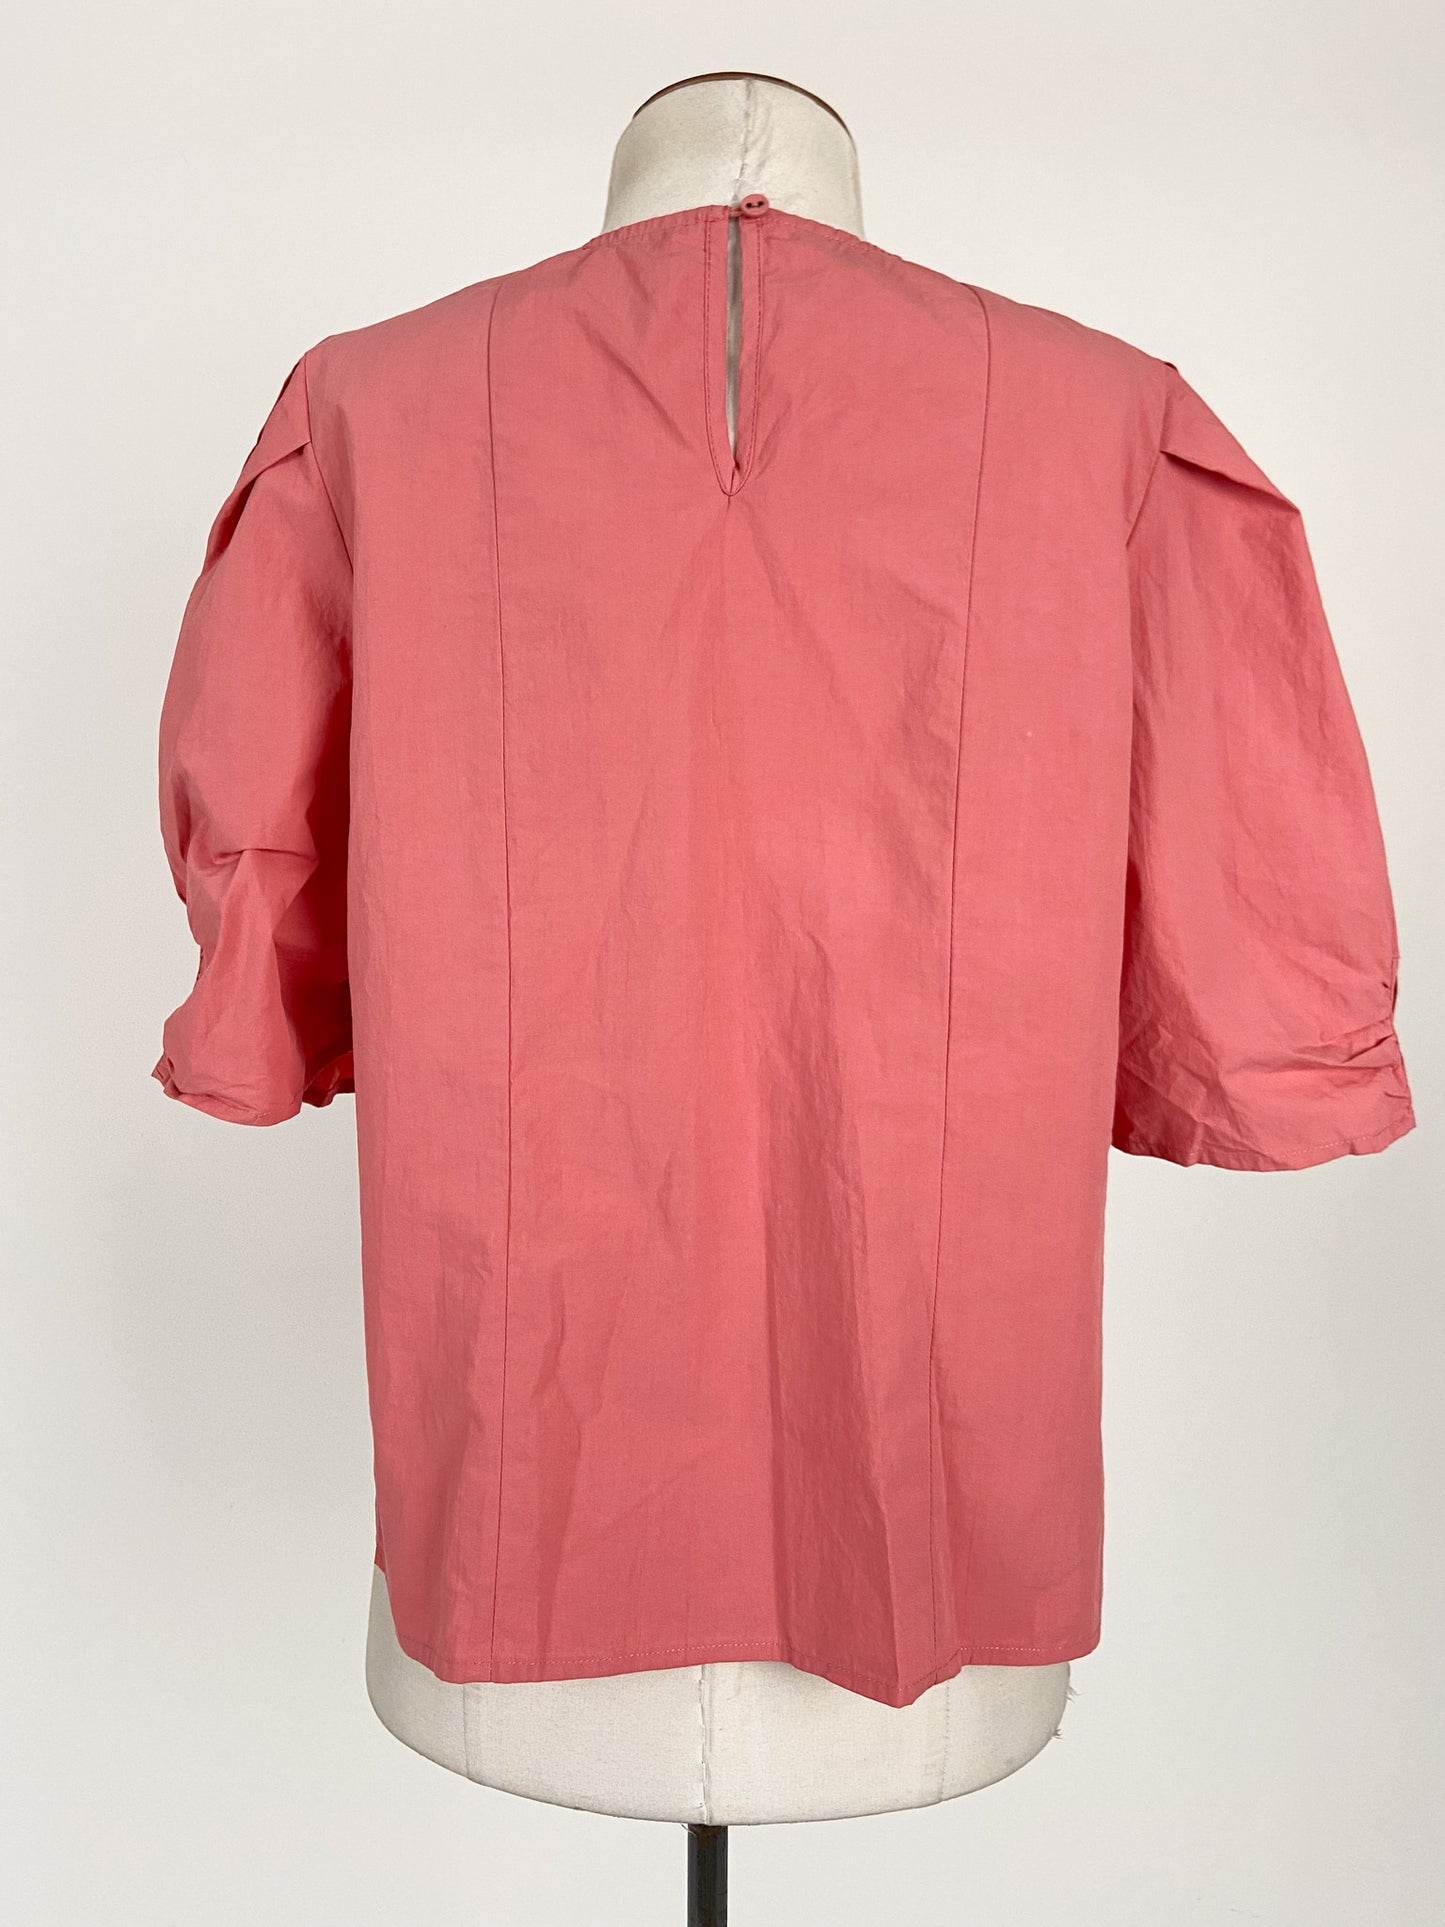 Morrison | Red Casual/Workwear Top | Size 8